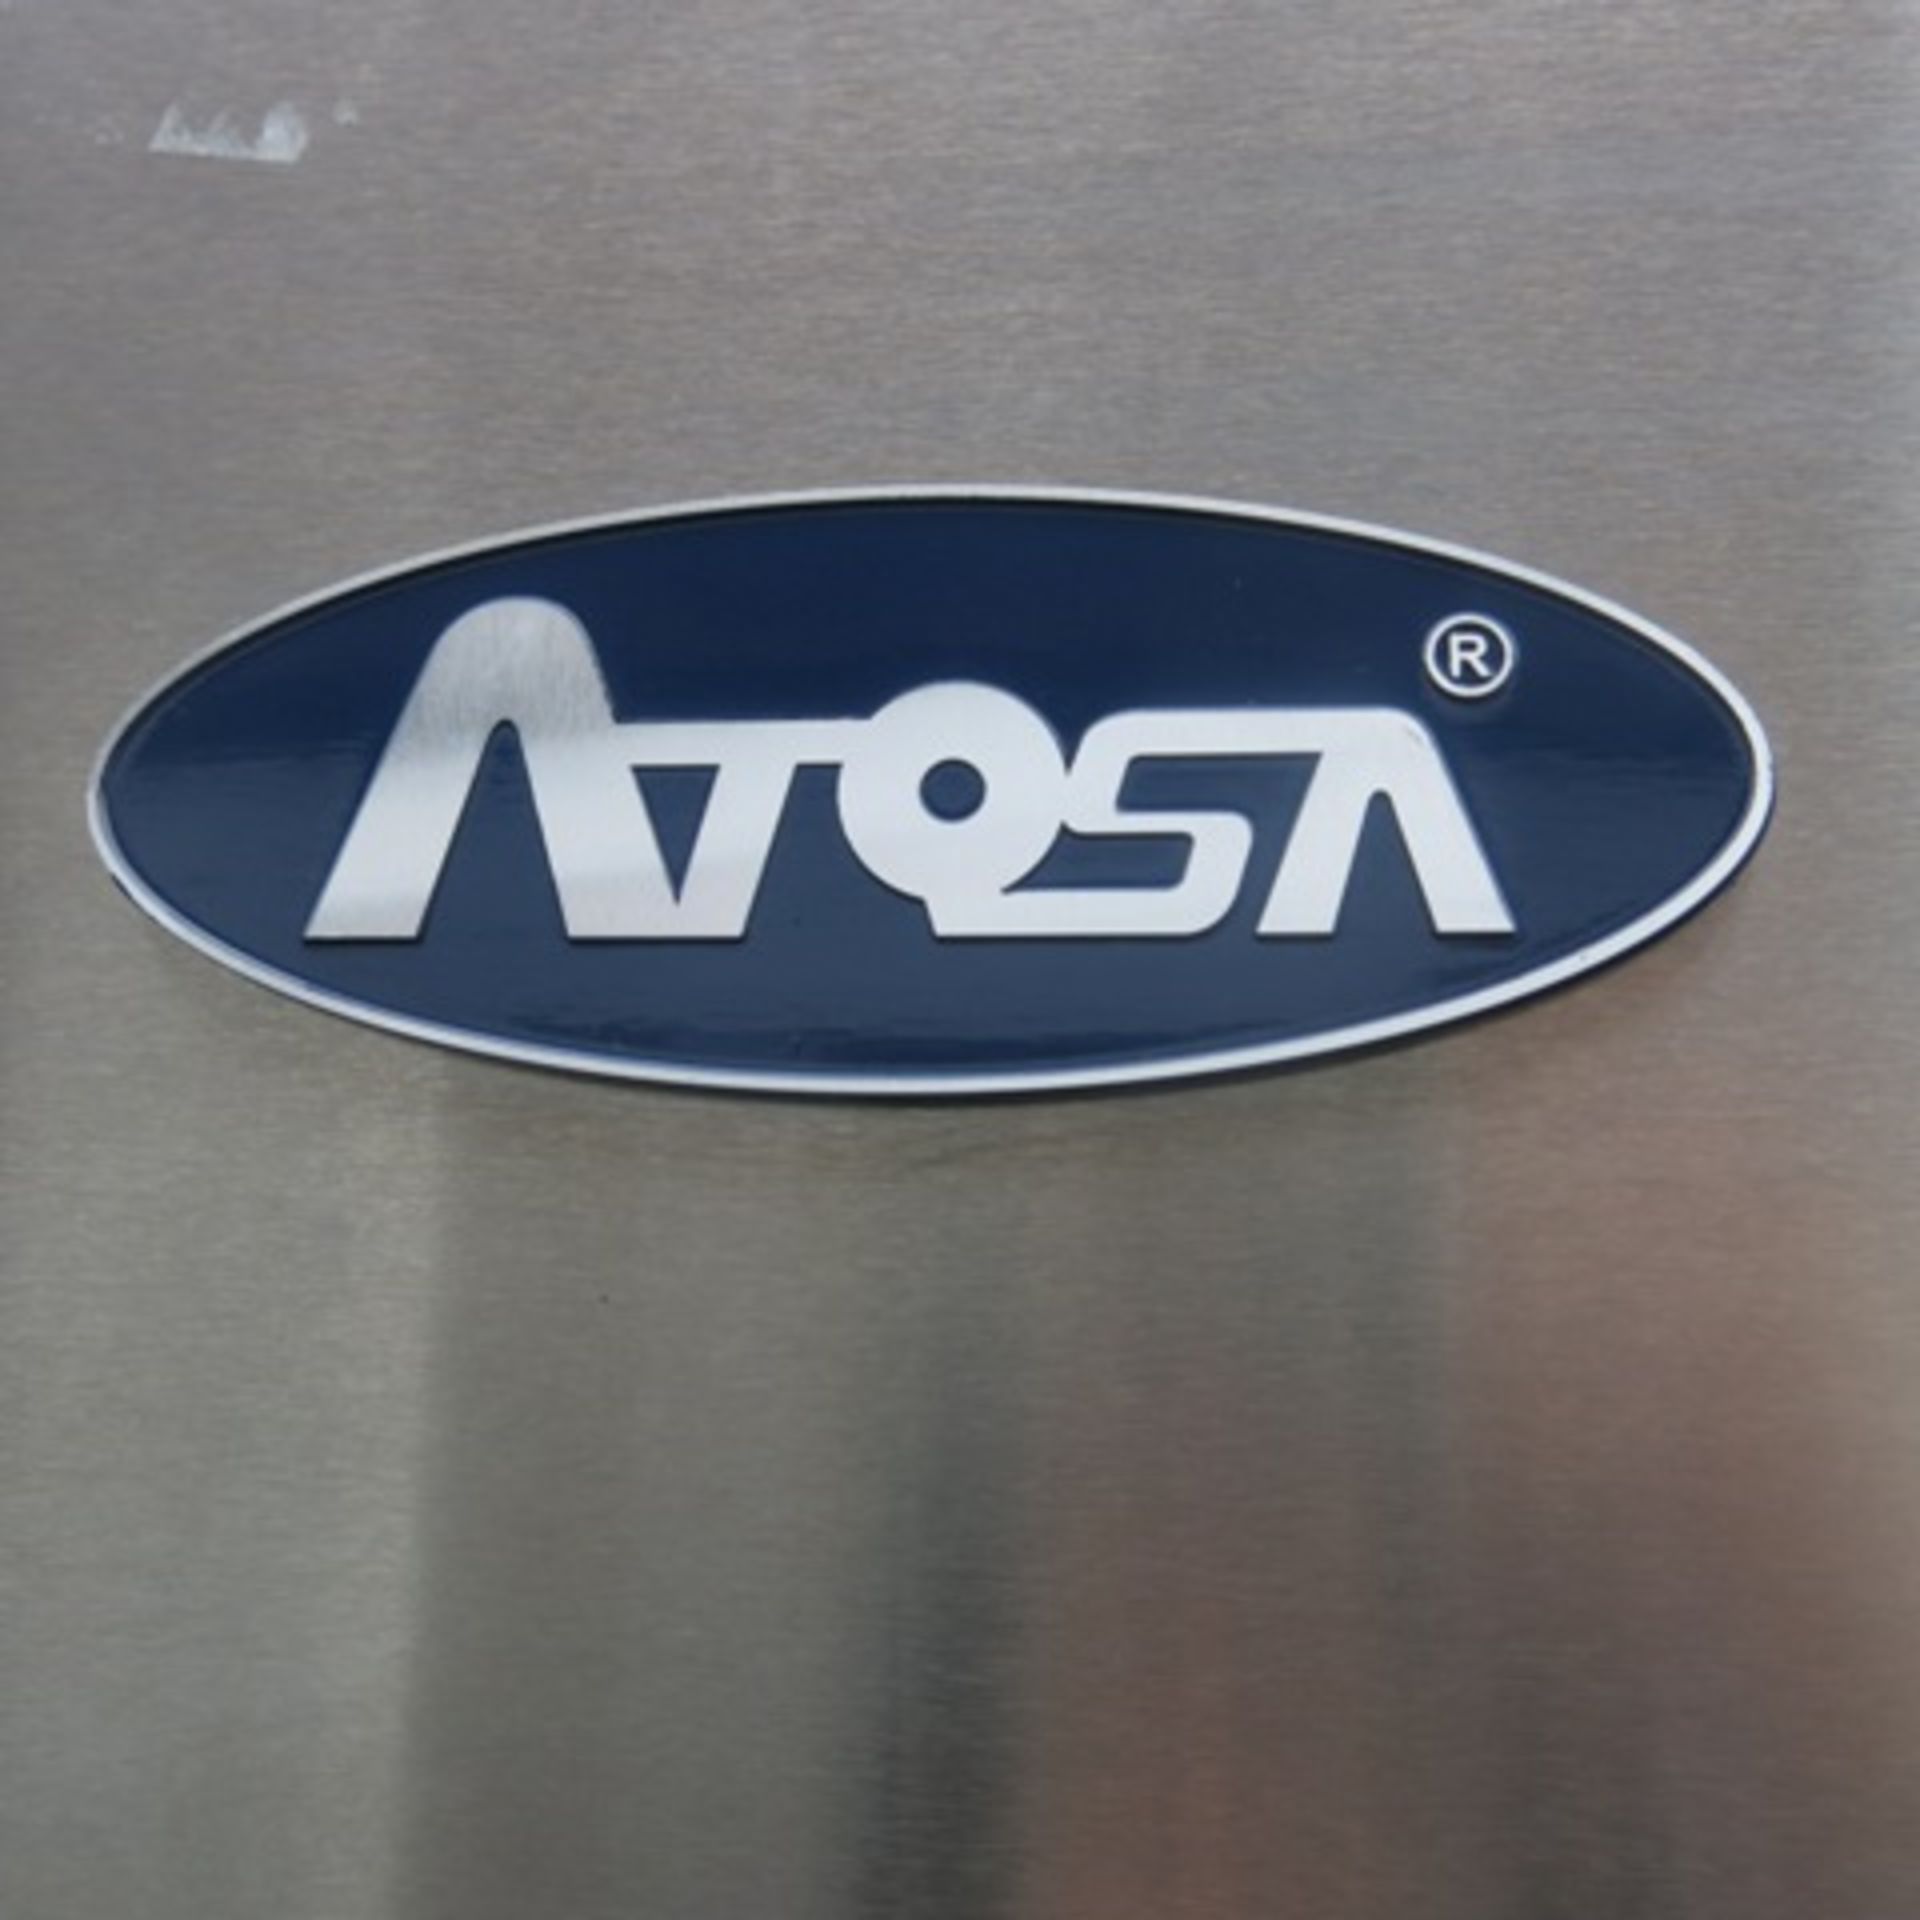 Atosa Stainless Steel Single Door Upright Refrigerator, Model MBL8950. Size (H) 210cm x (D) 80cm - Image 2 of 7